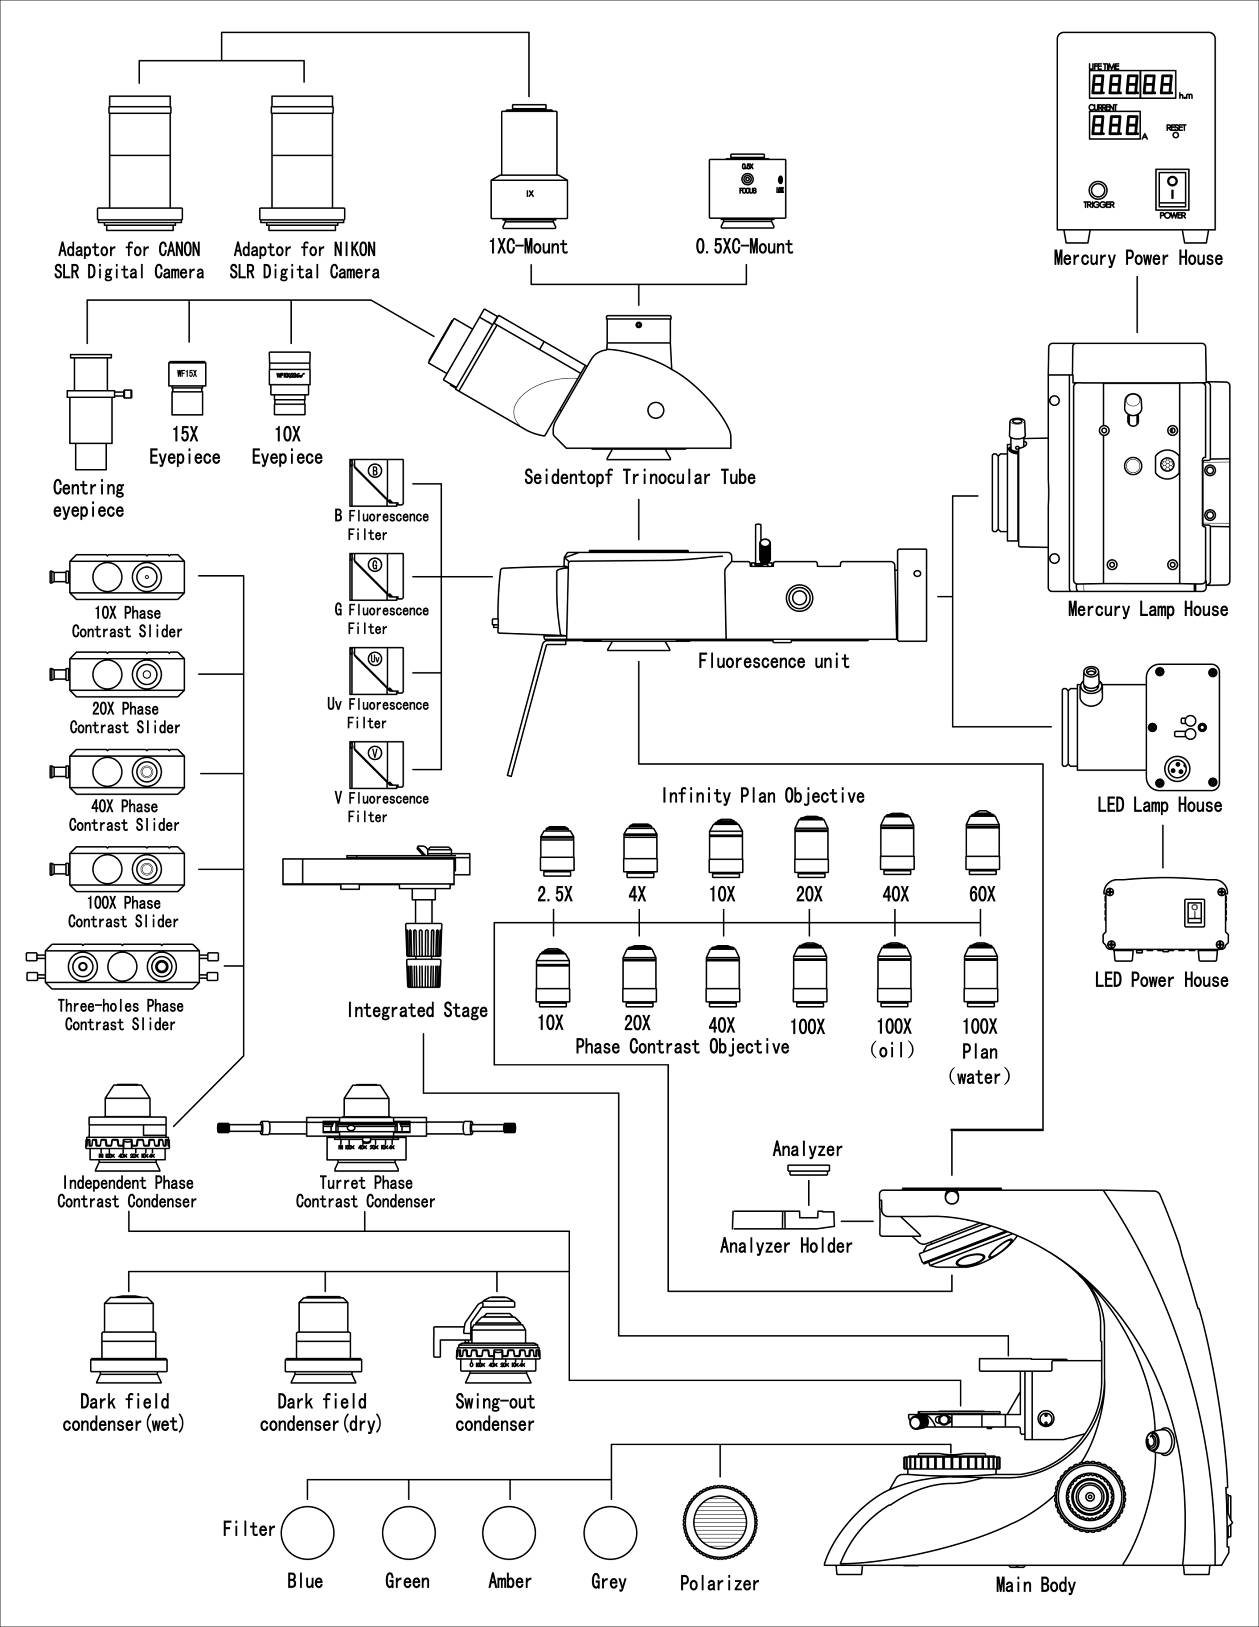 BS-2063 systemdiagram